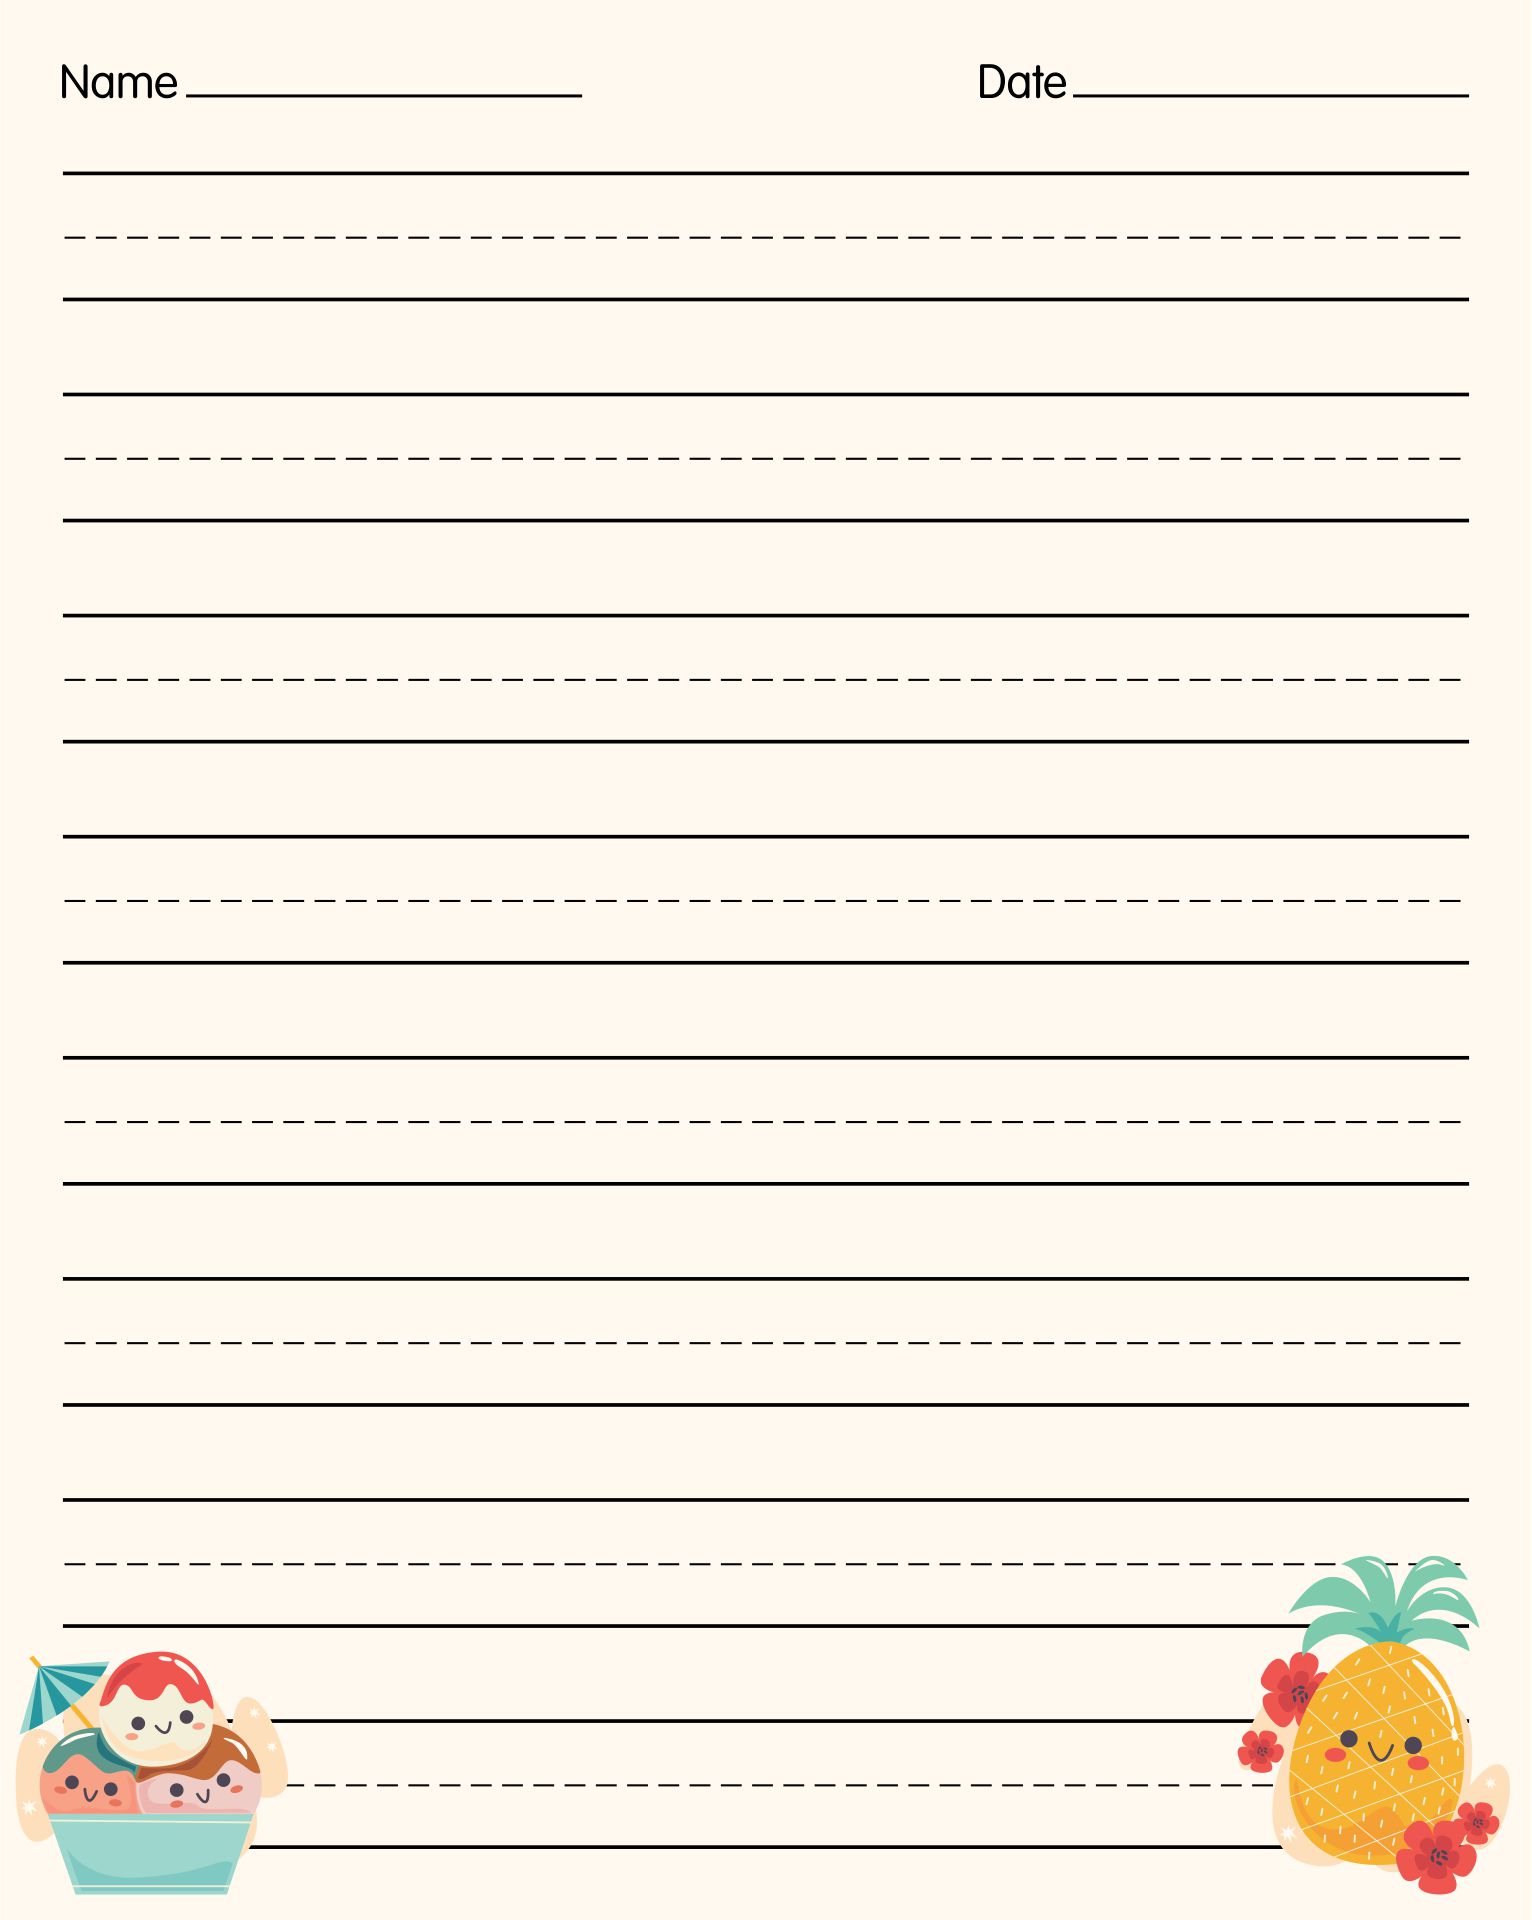 printable-primary-lined-paper-printable-world-holiday